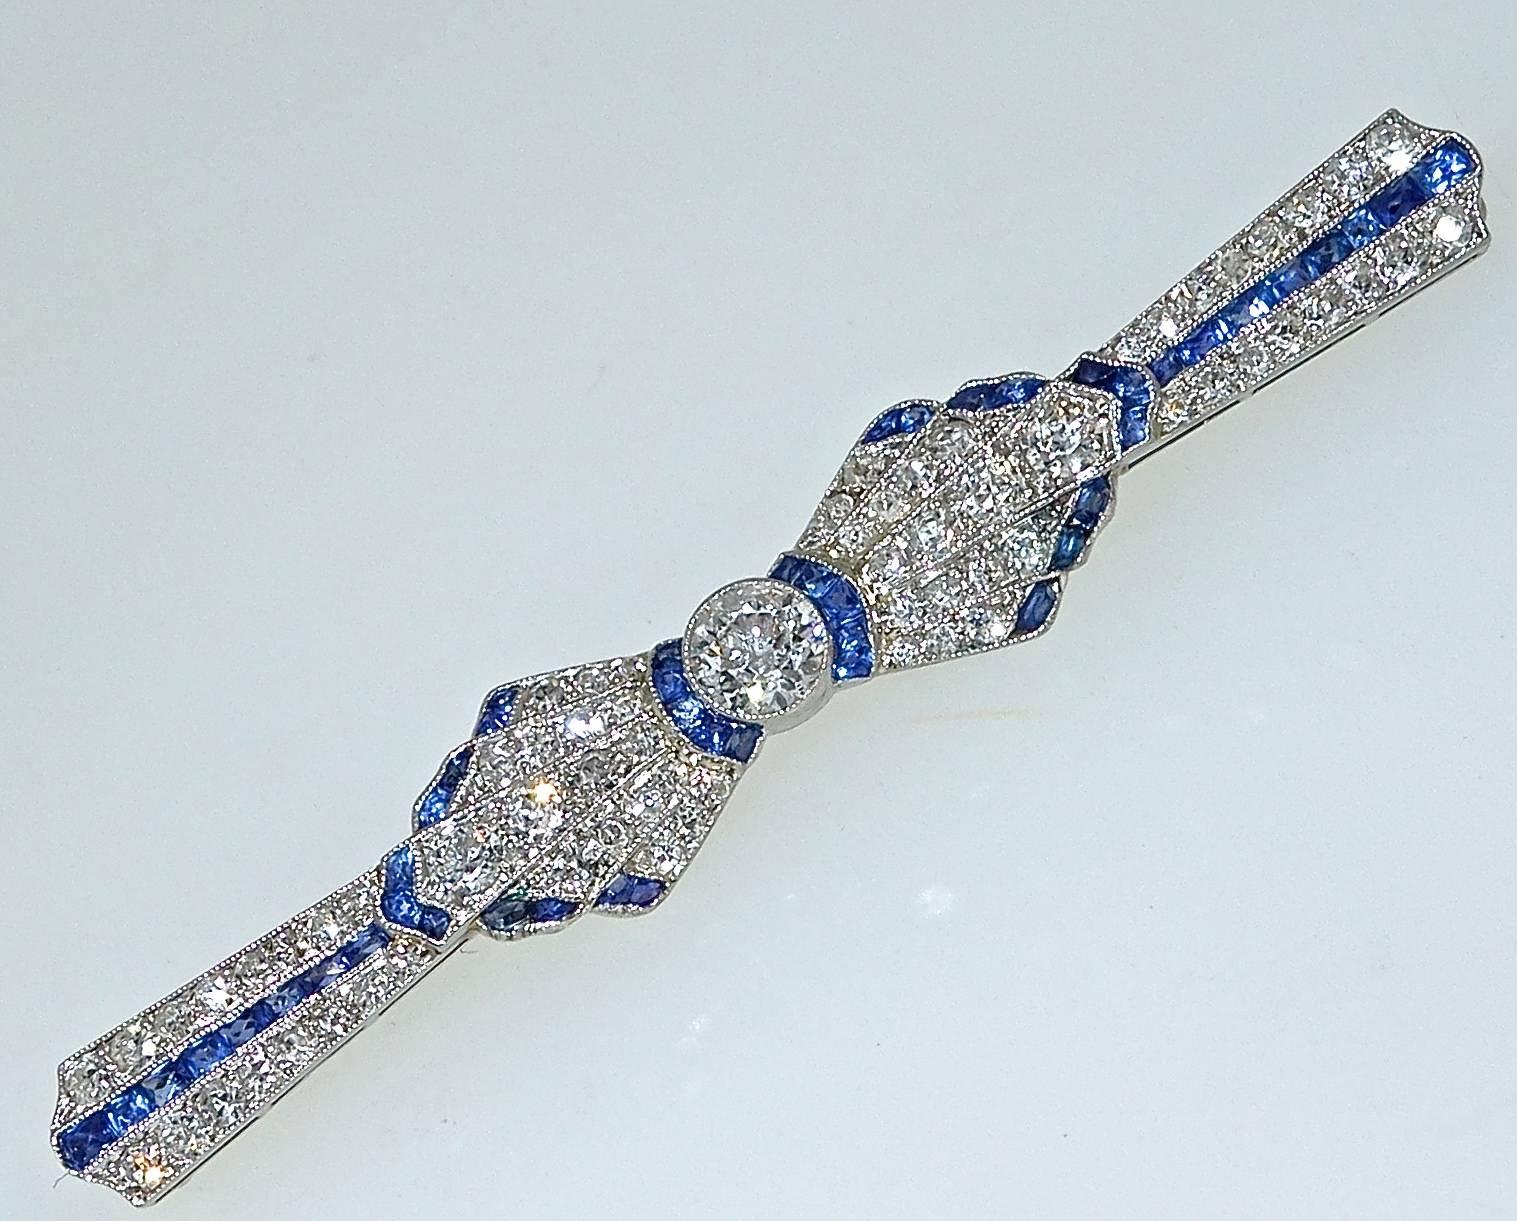 Platinum (with a gold pin stem), this brooch has fine diamonds and fancy cut fine blue sapphires.  The pin is 2.50 inches long and centers a .50 ct old cut diamond.  The 45 French cut fine natural sapphires are a bright blue and weigh approximately